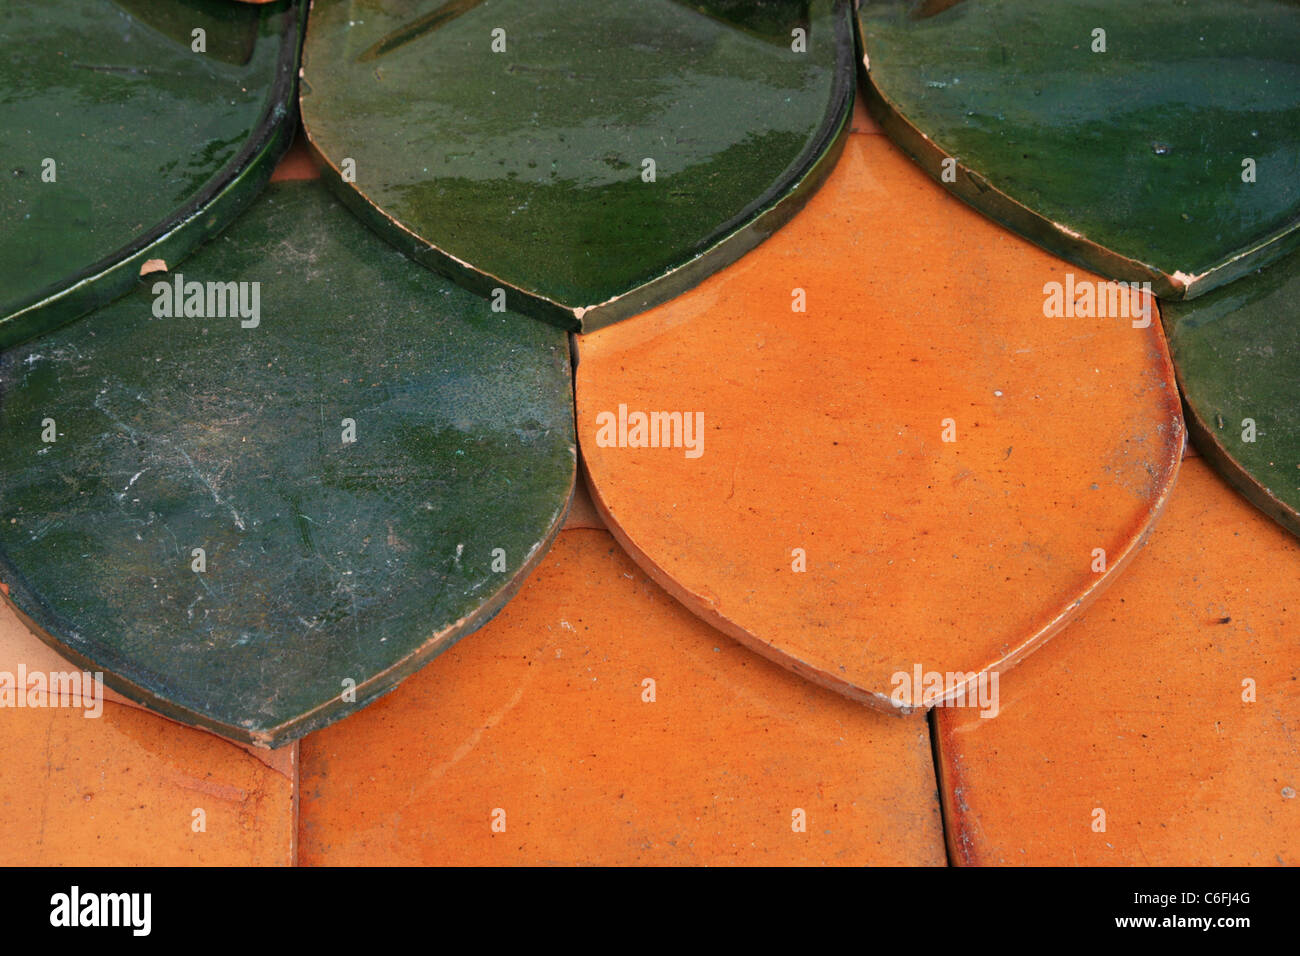 orange and green glazed ceramic tile roof detail from temple Stock Photo